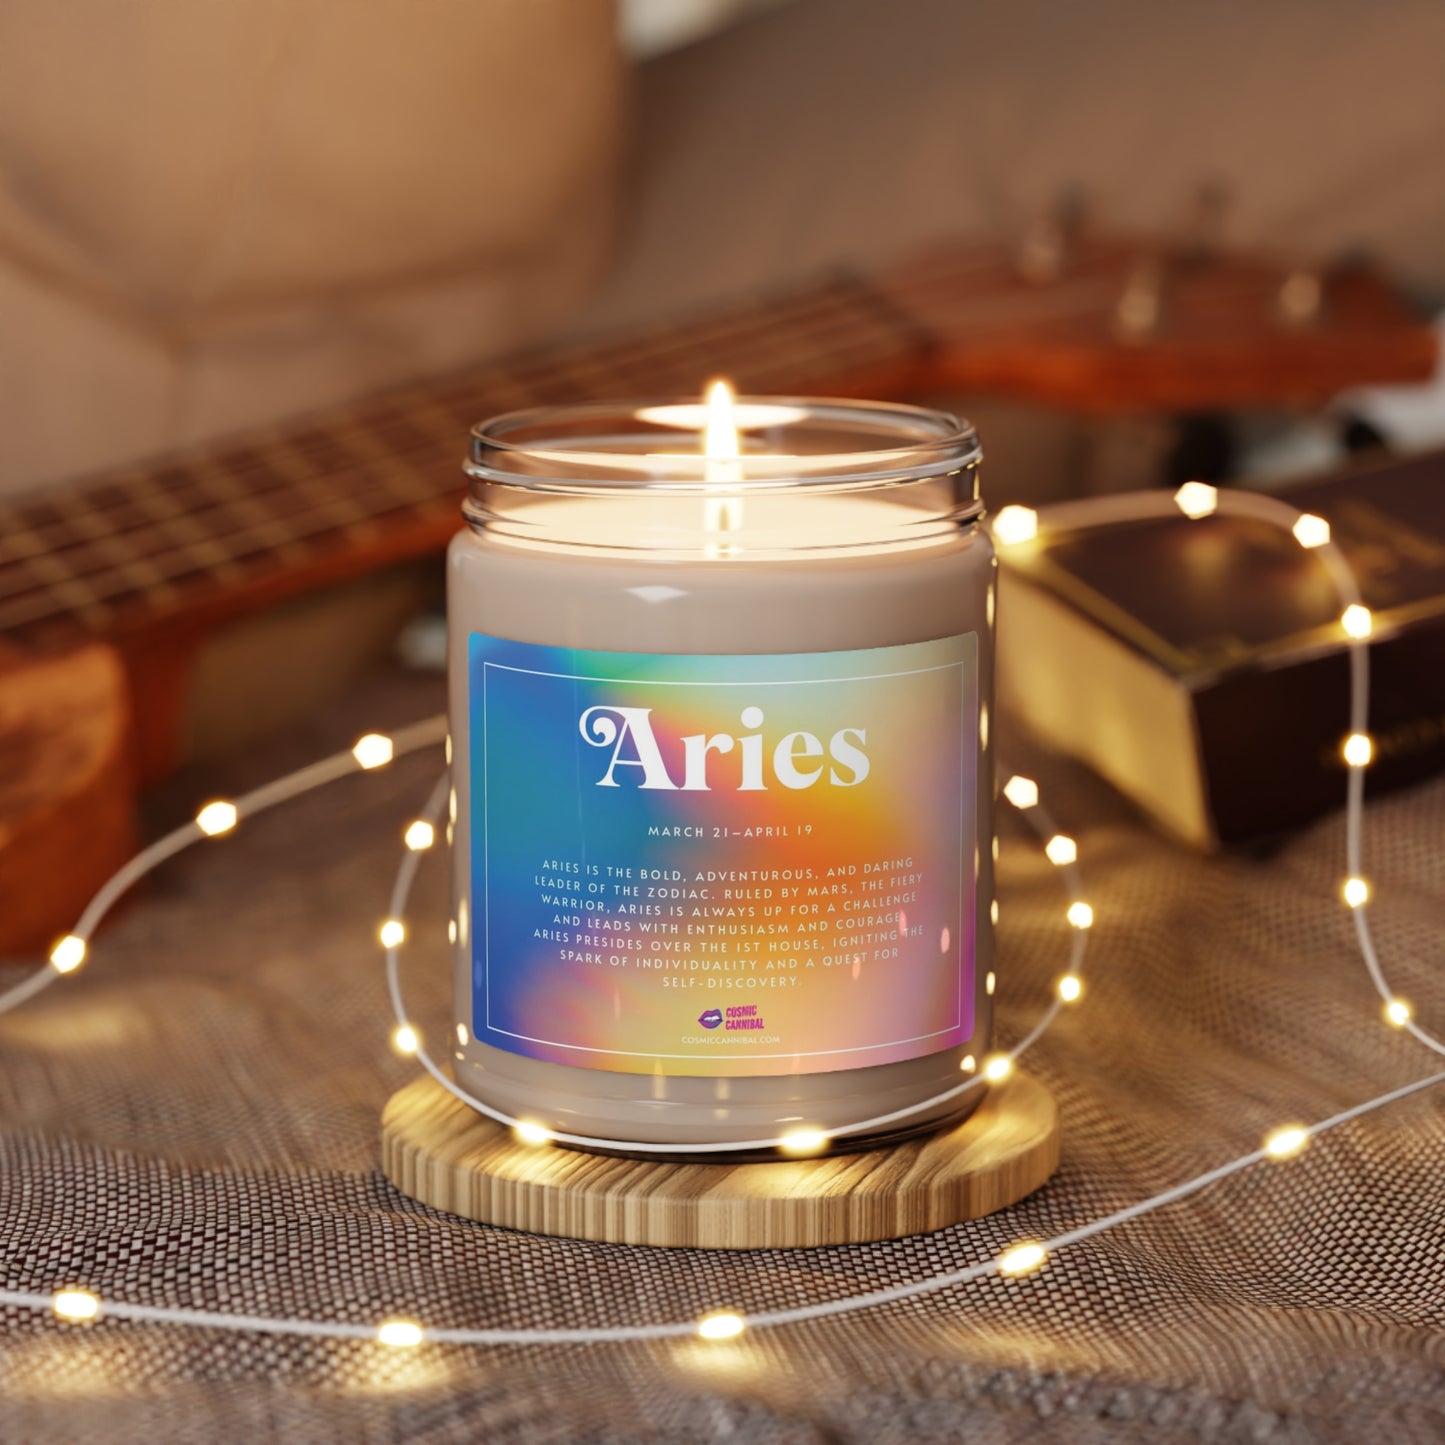 The Aries Candle